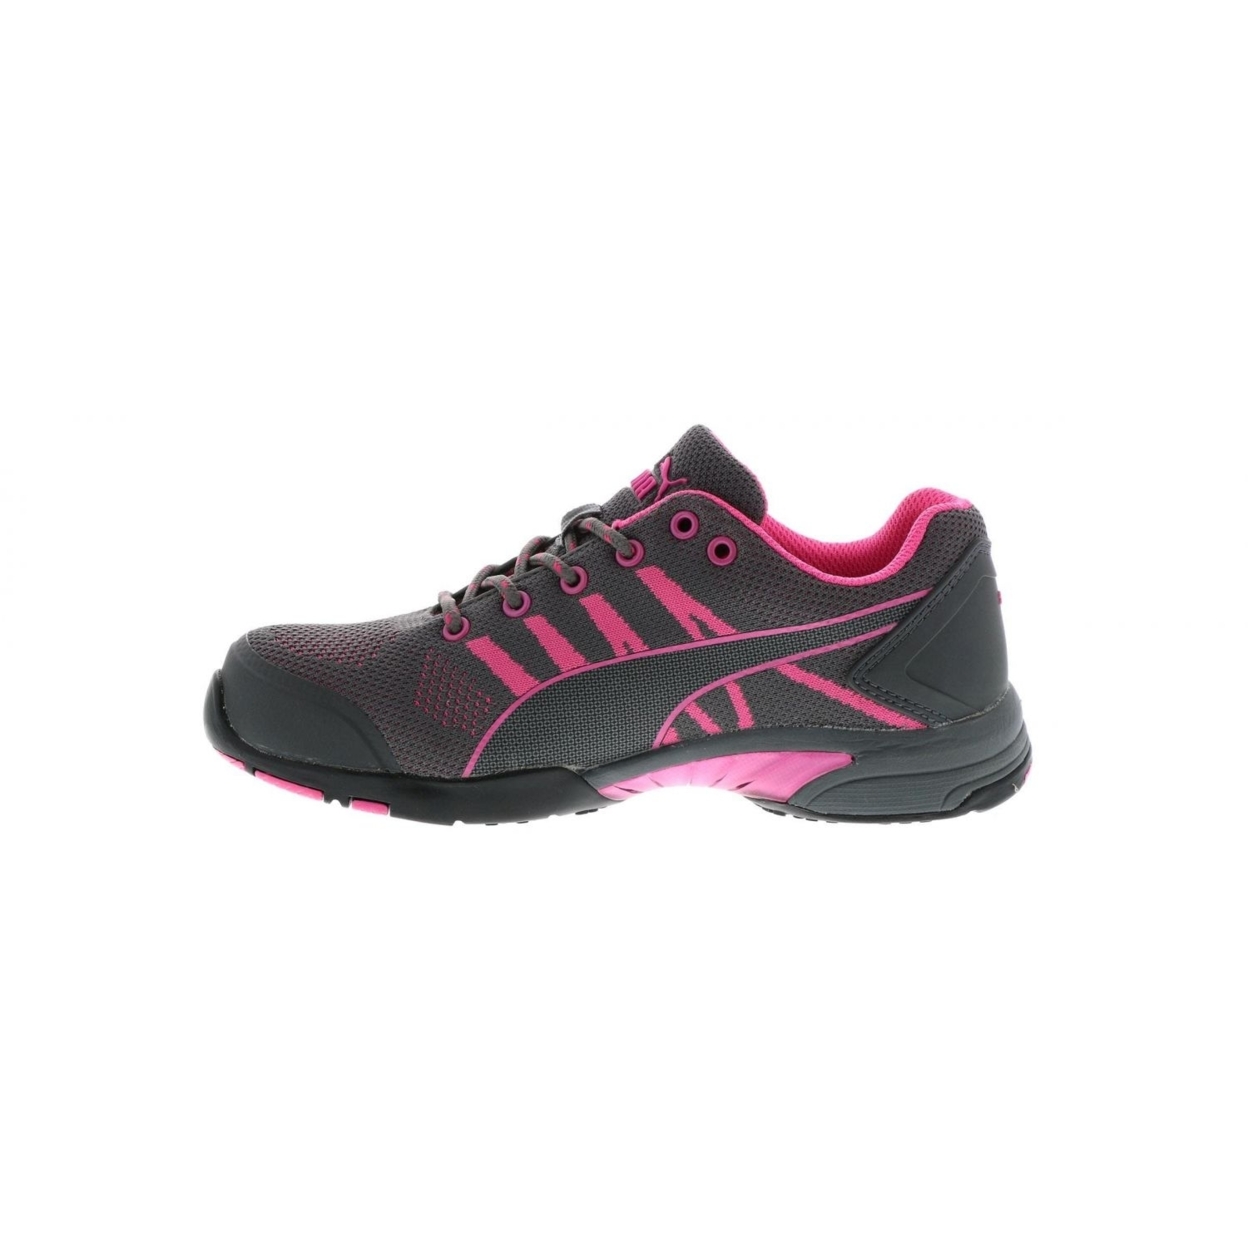 PUMA Safety Women's Celerity Knit Low Steel Toe ESD Work Shoe Pink - 642915 ONE SIZE PINK - PINK, 7.5